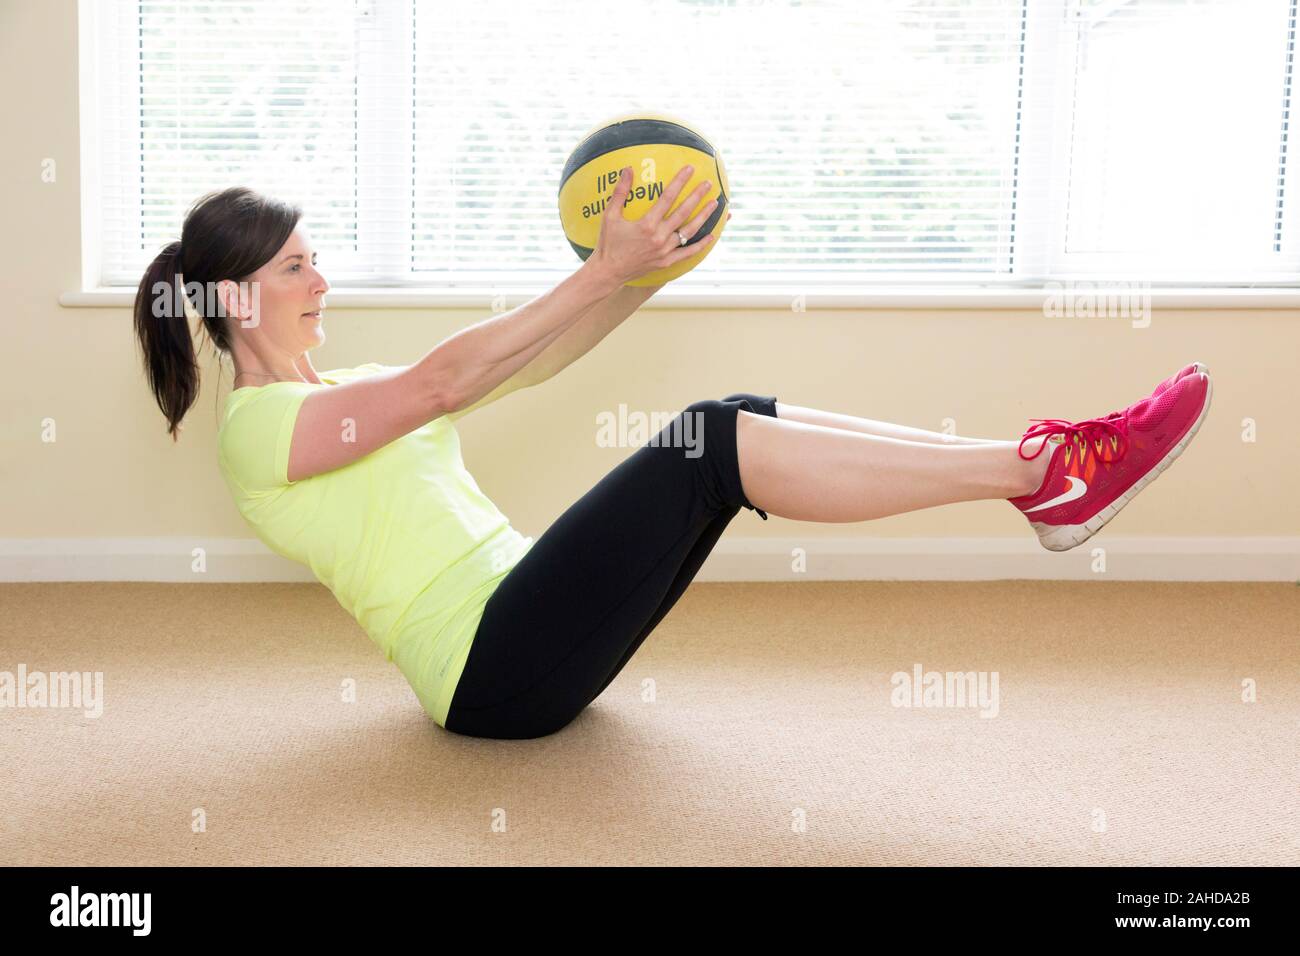 woman doing sit up exercise with medicine ball Stock Photo